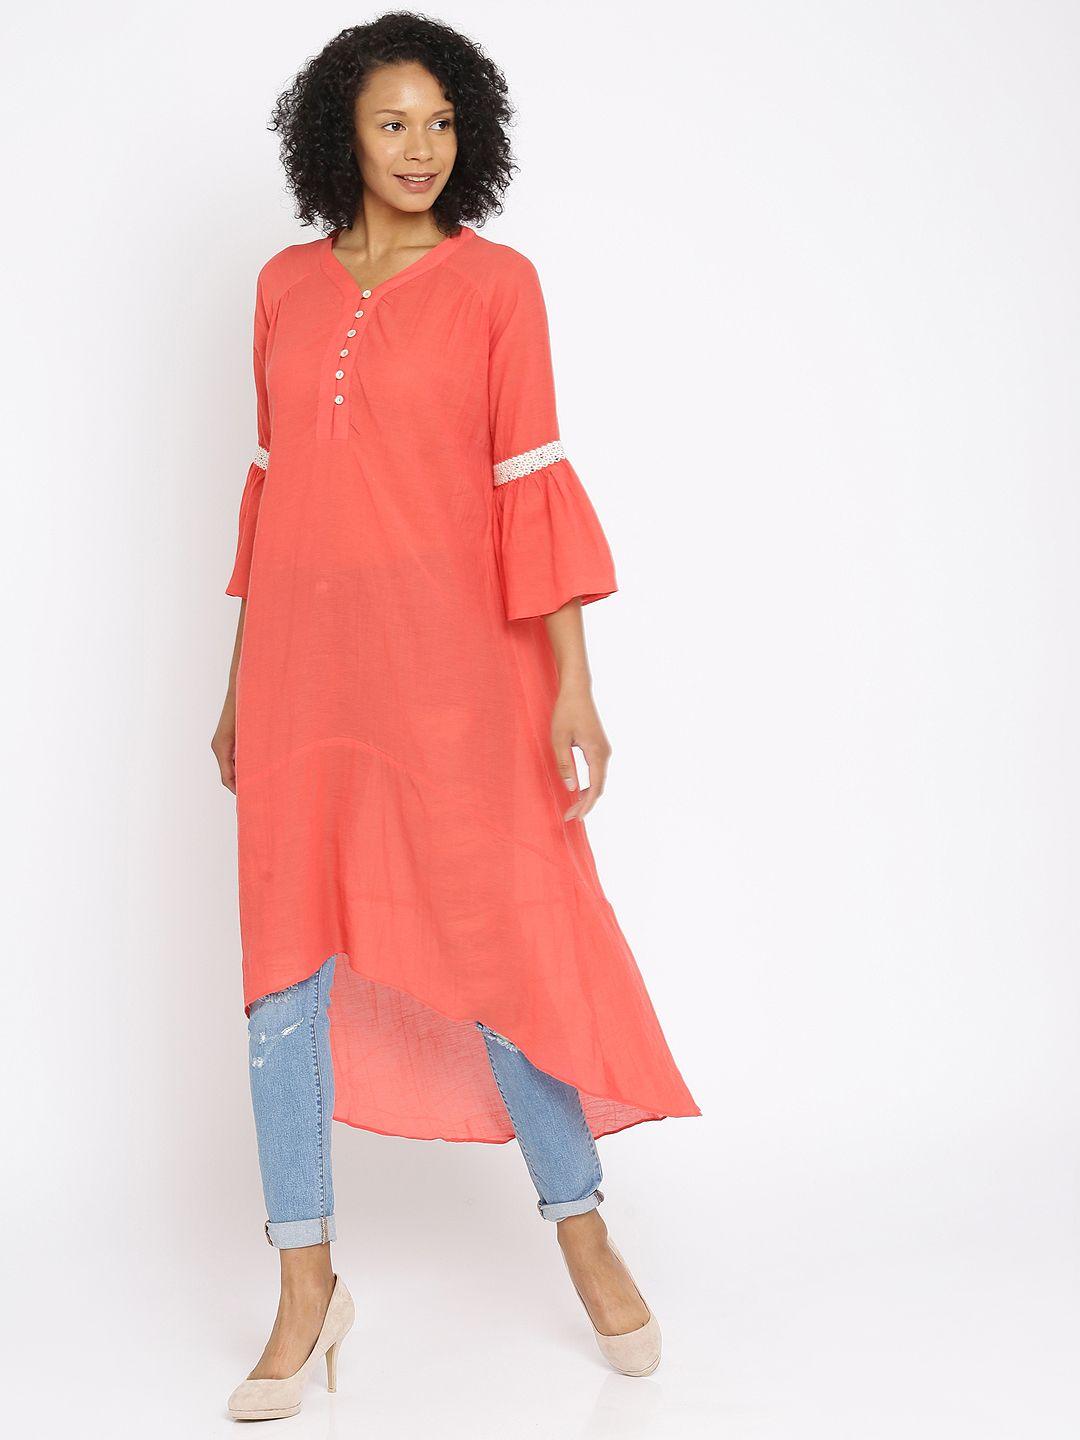 AND Coral Pink Sheer High-Low Tunic